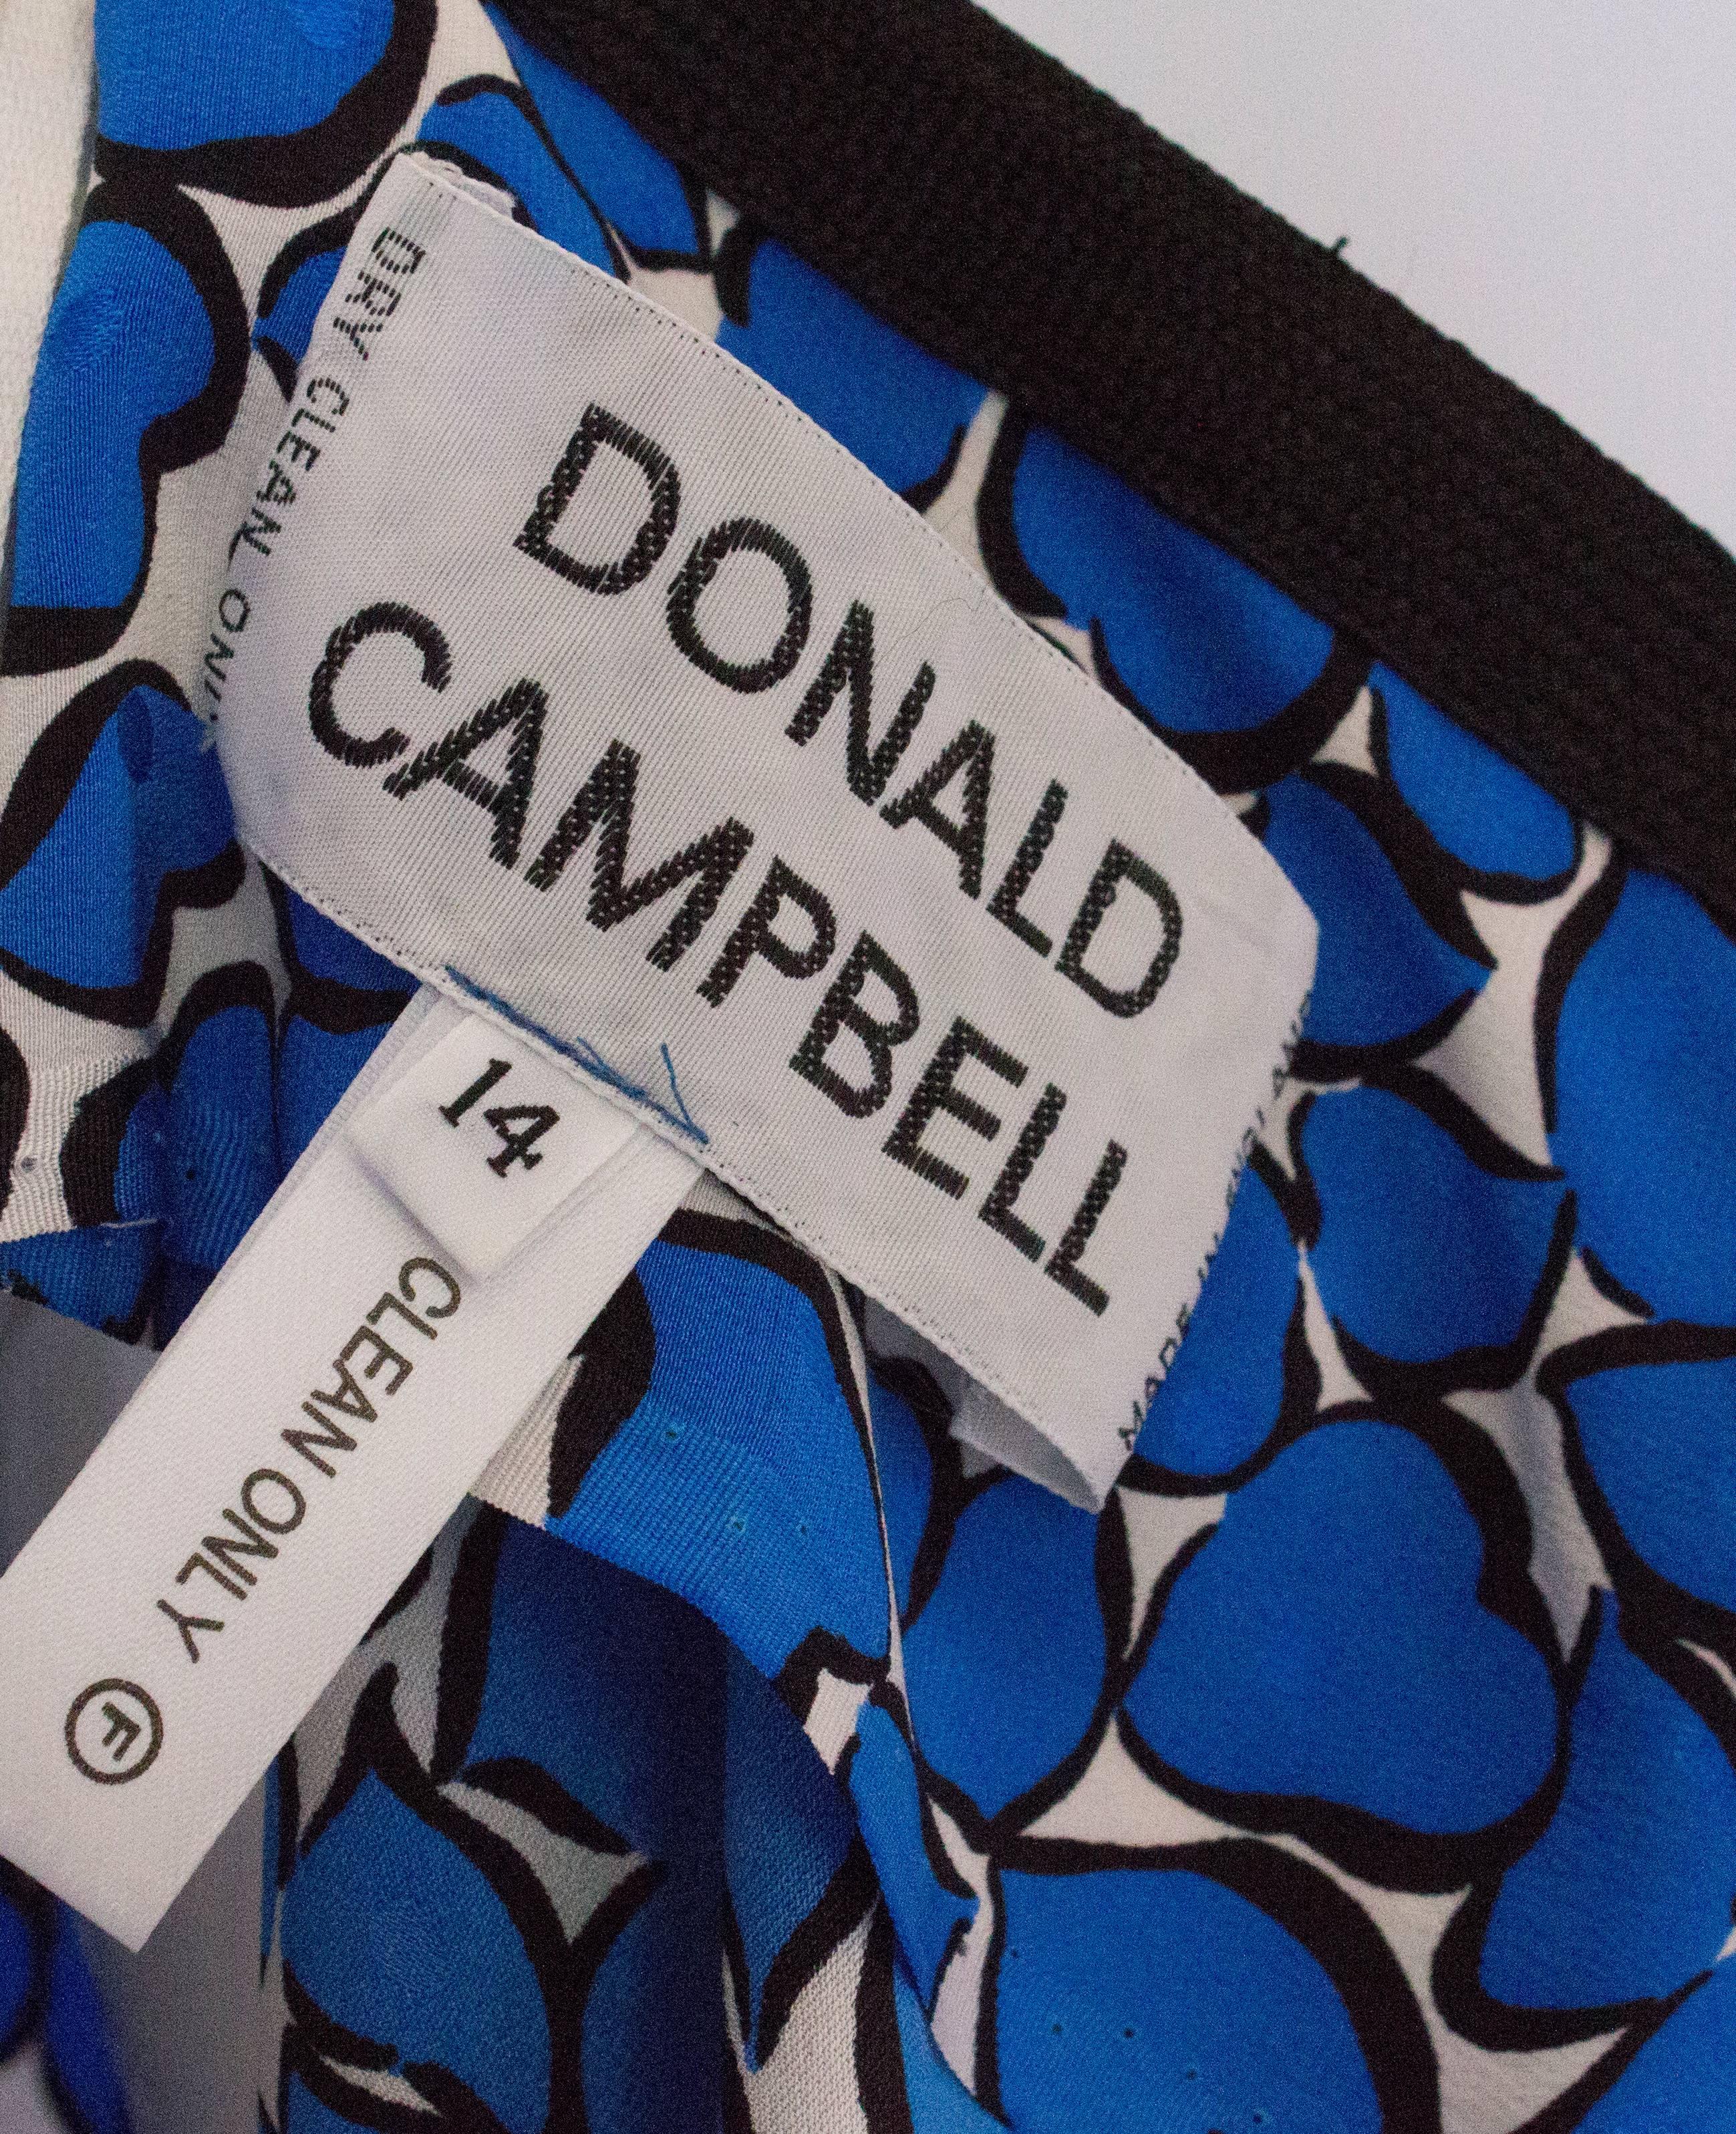 Blue and White Silk Dress by Donald Campbell 1